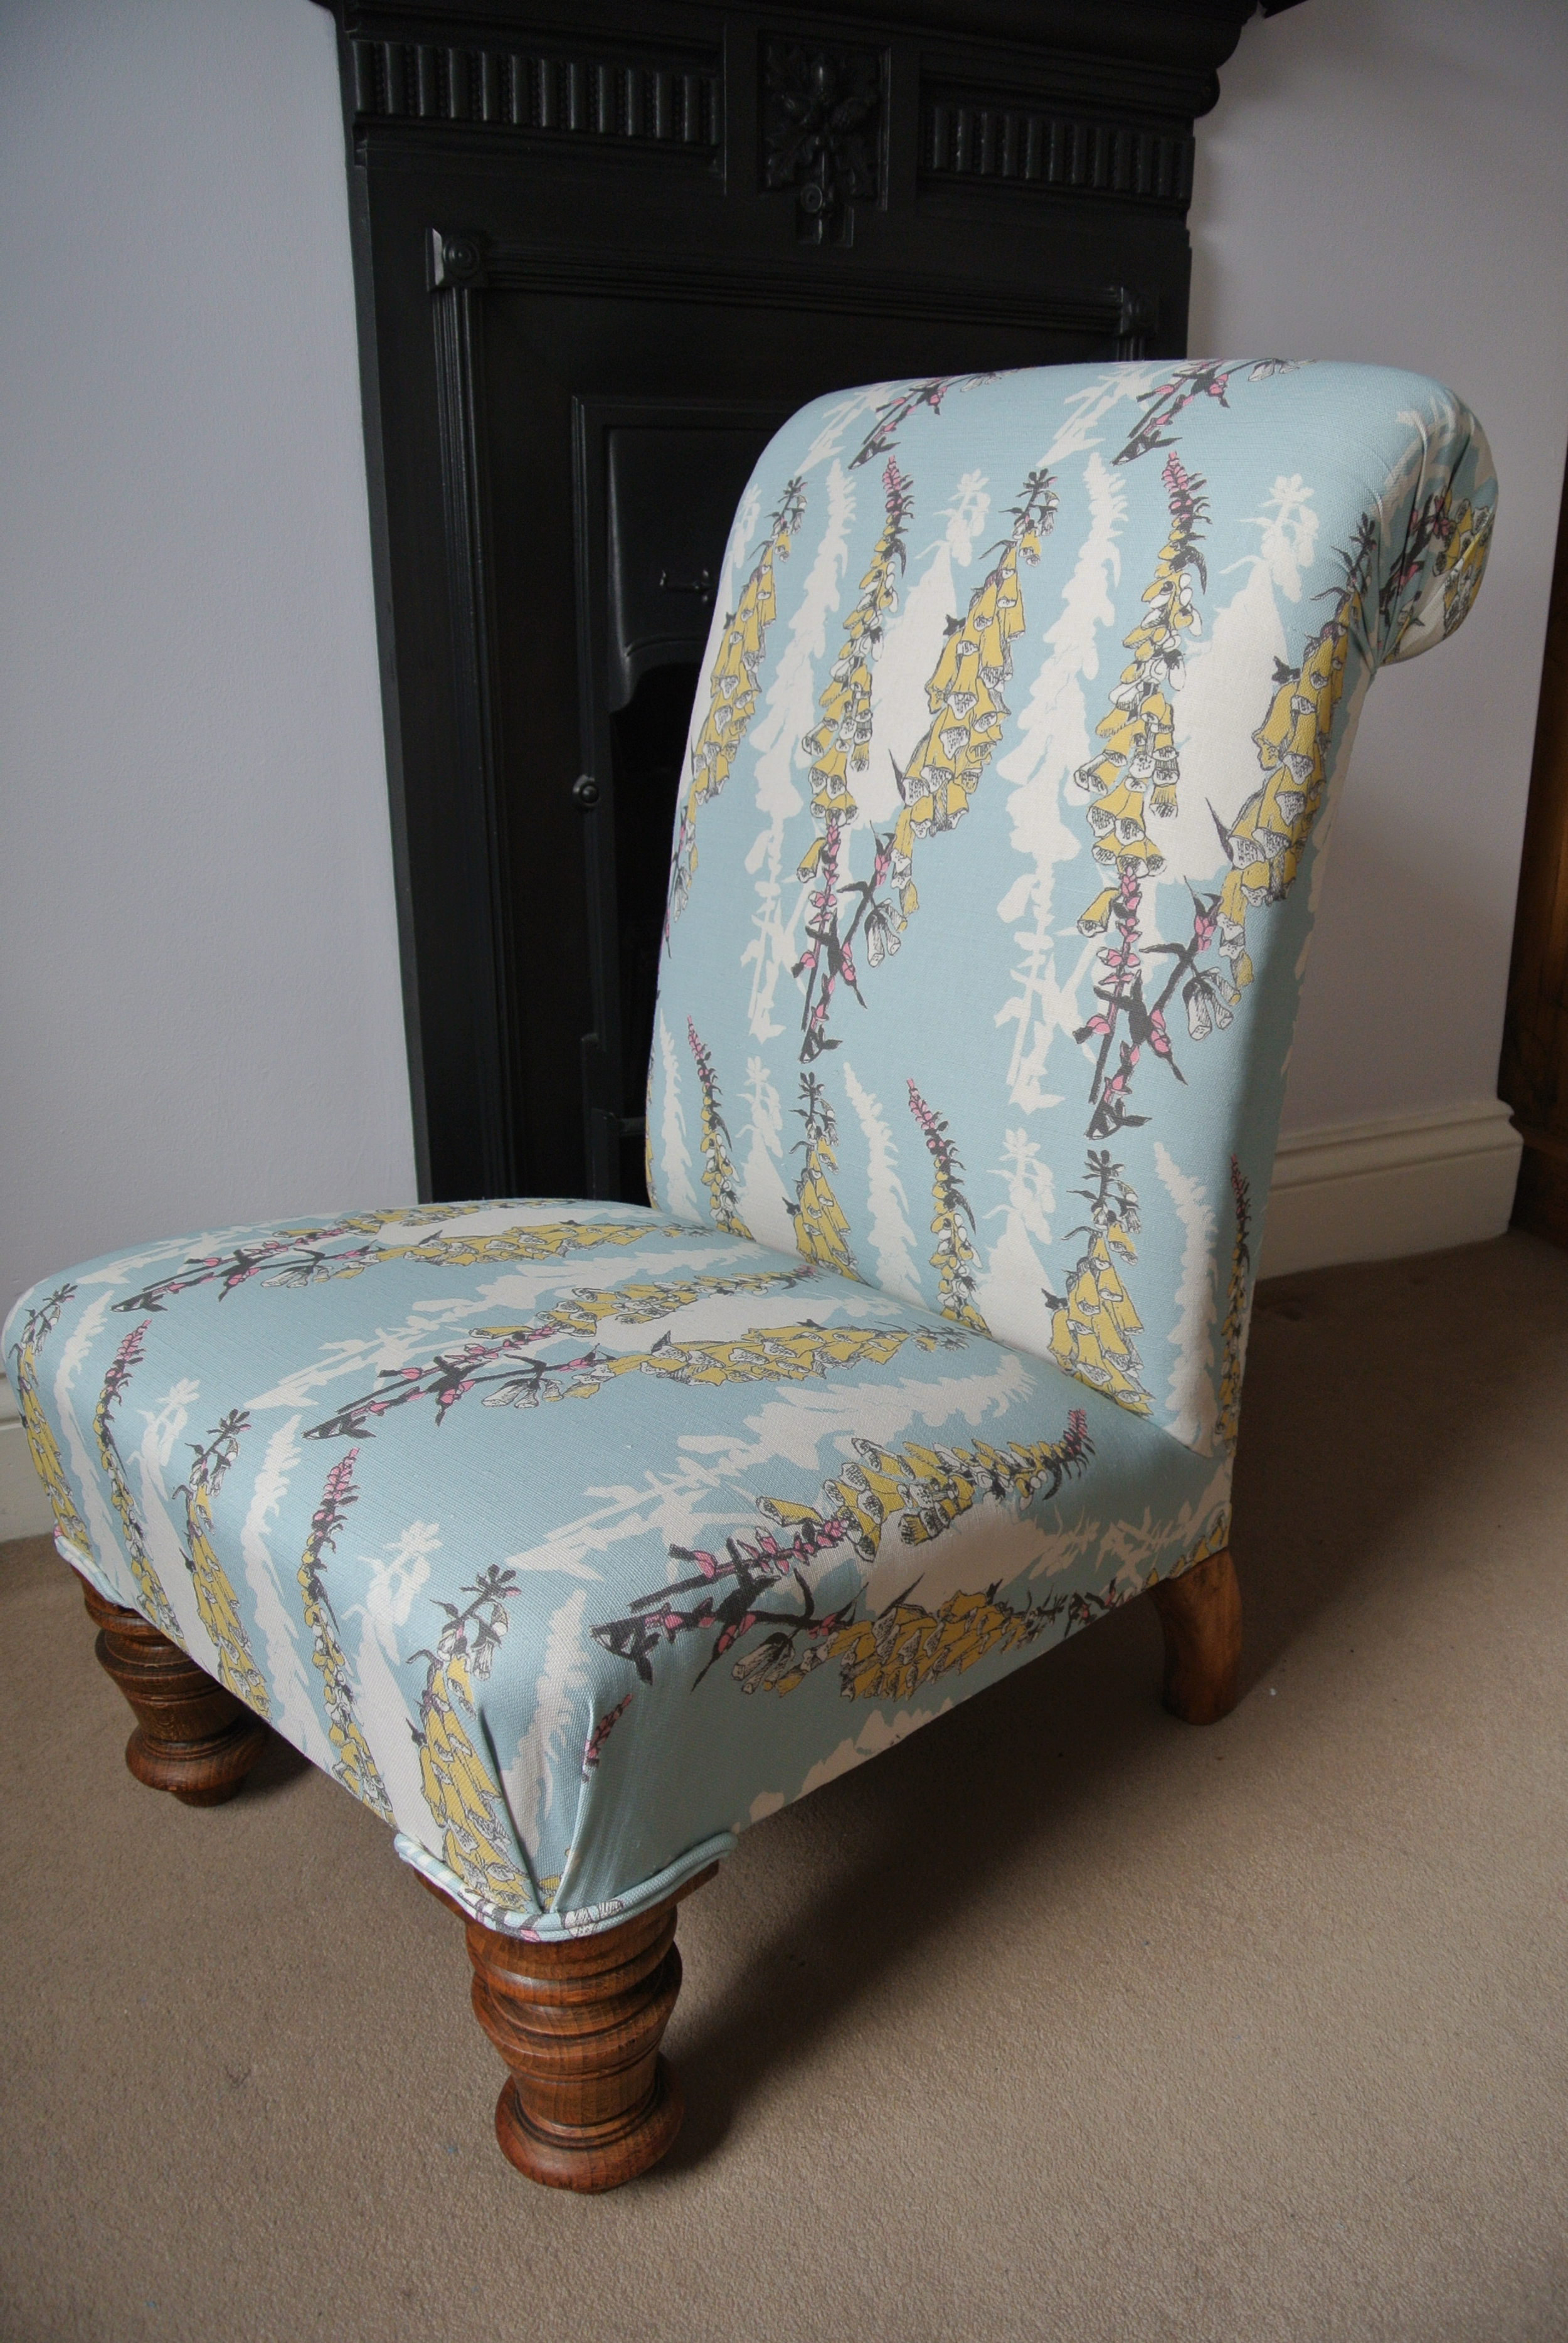  upholstered in Louise Body's 'Foxglove' fabric 